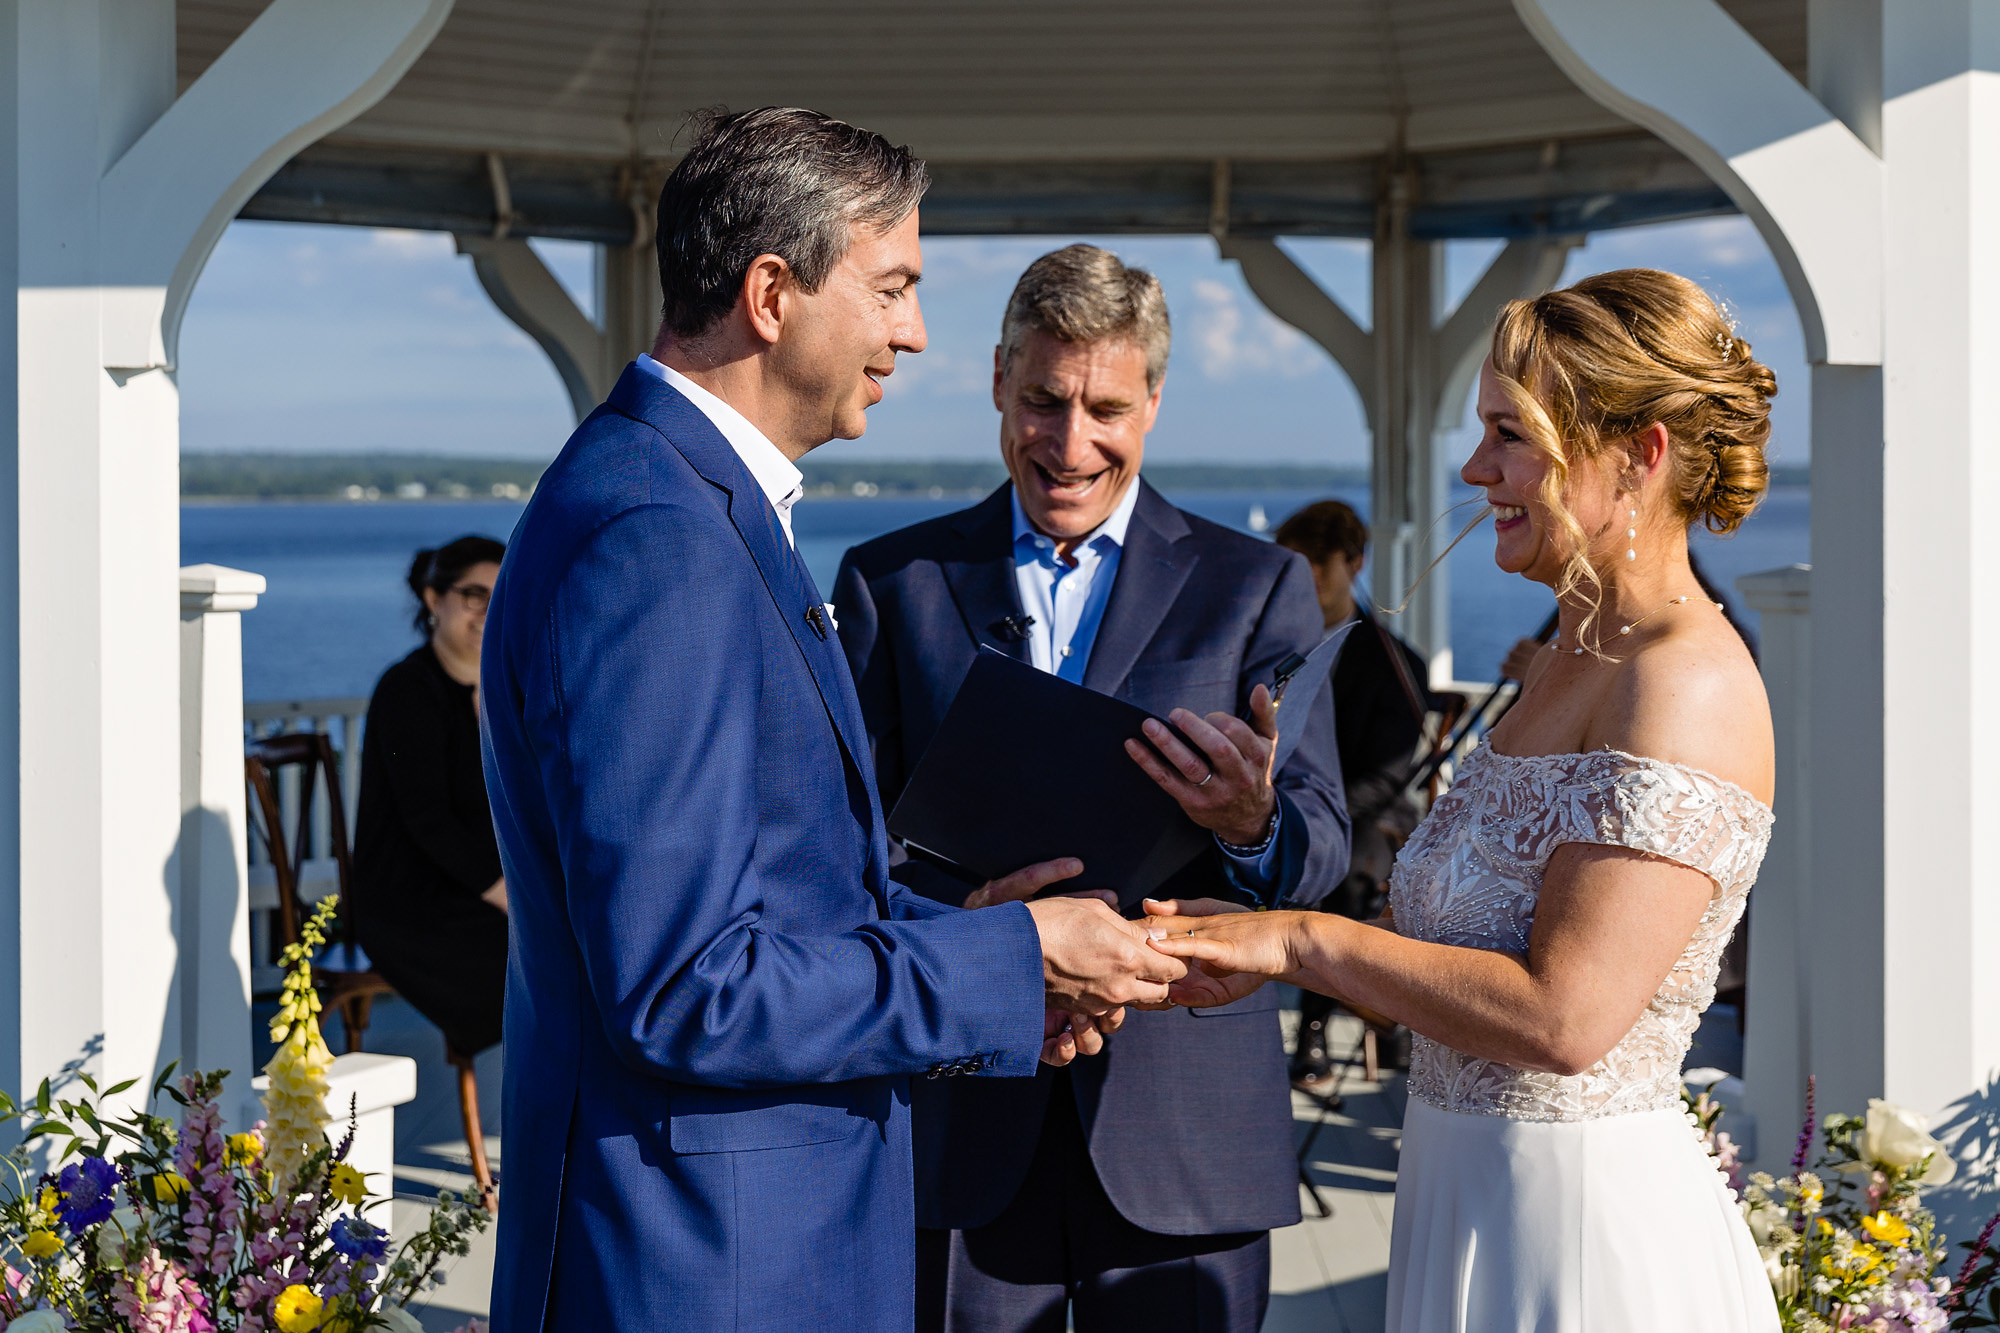 A wedding ceremony at a private estate in Maine